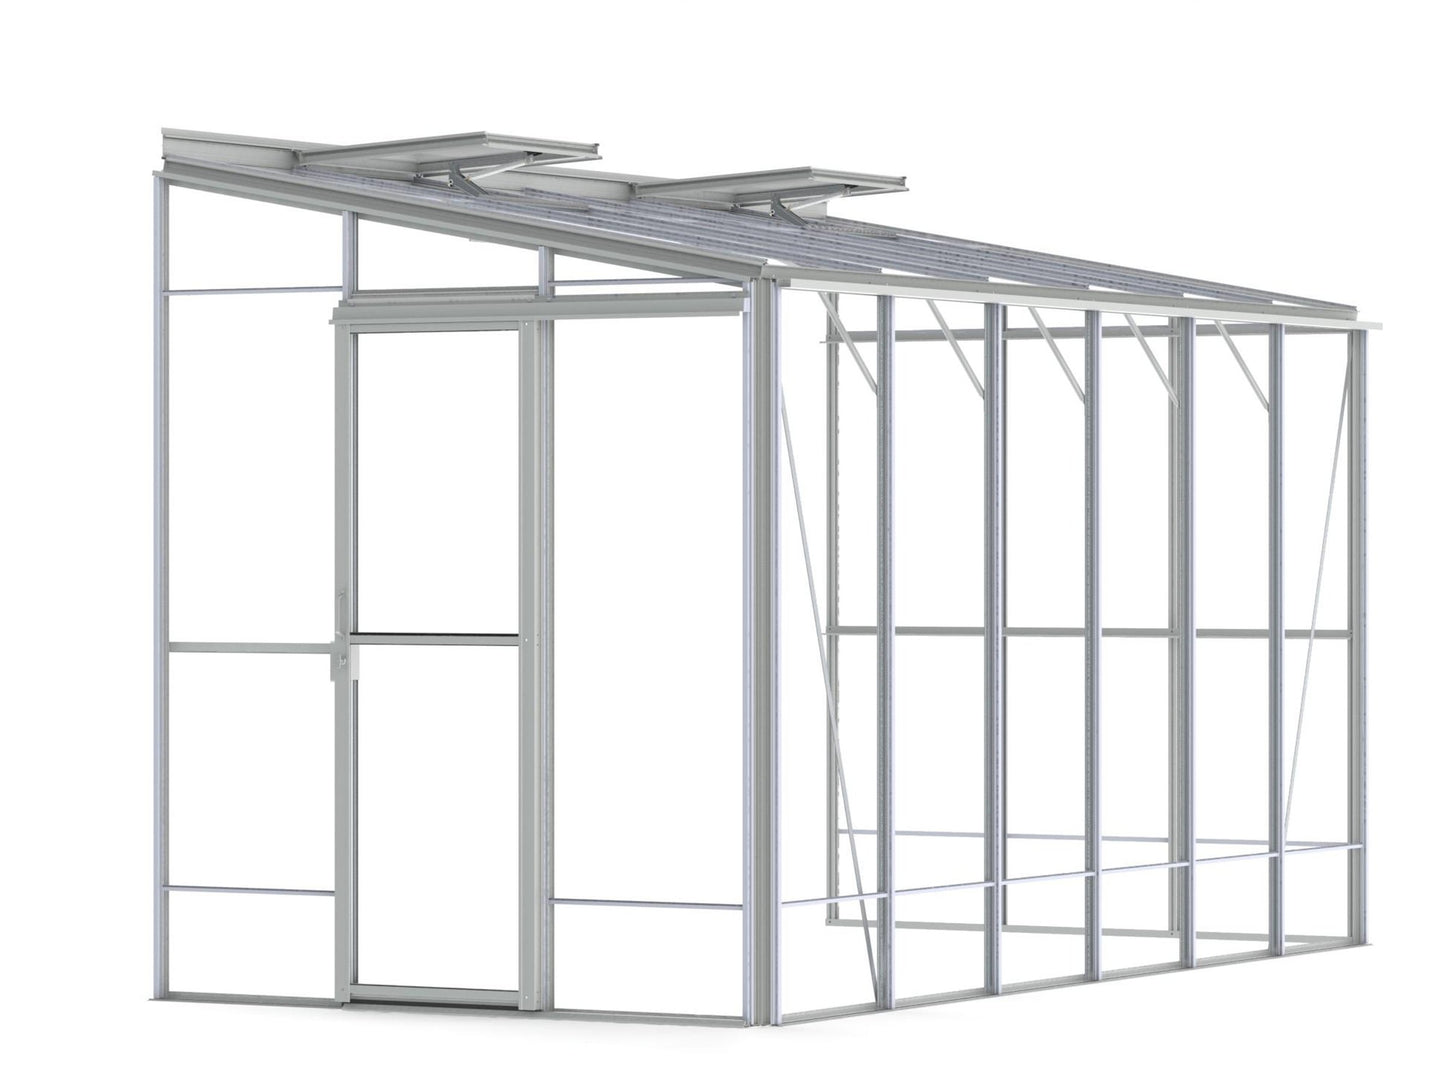 Robinsons 6ft wide LEAN-TO